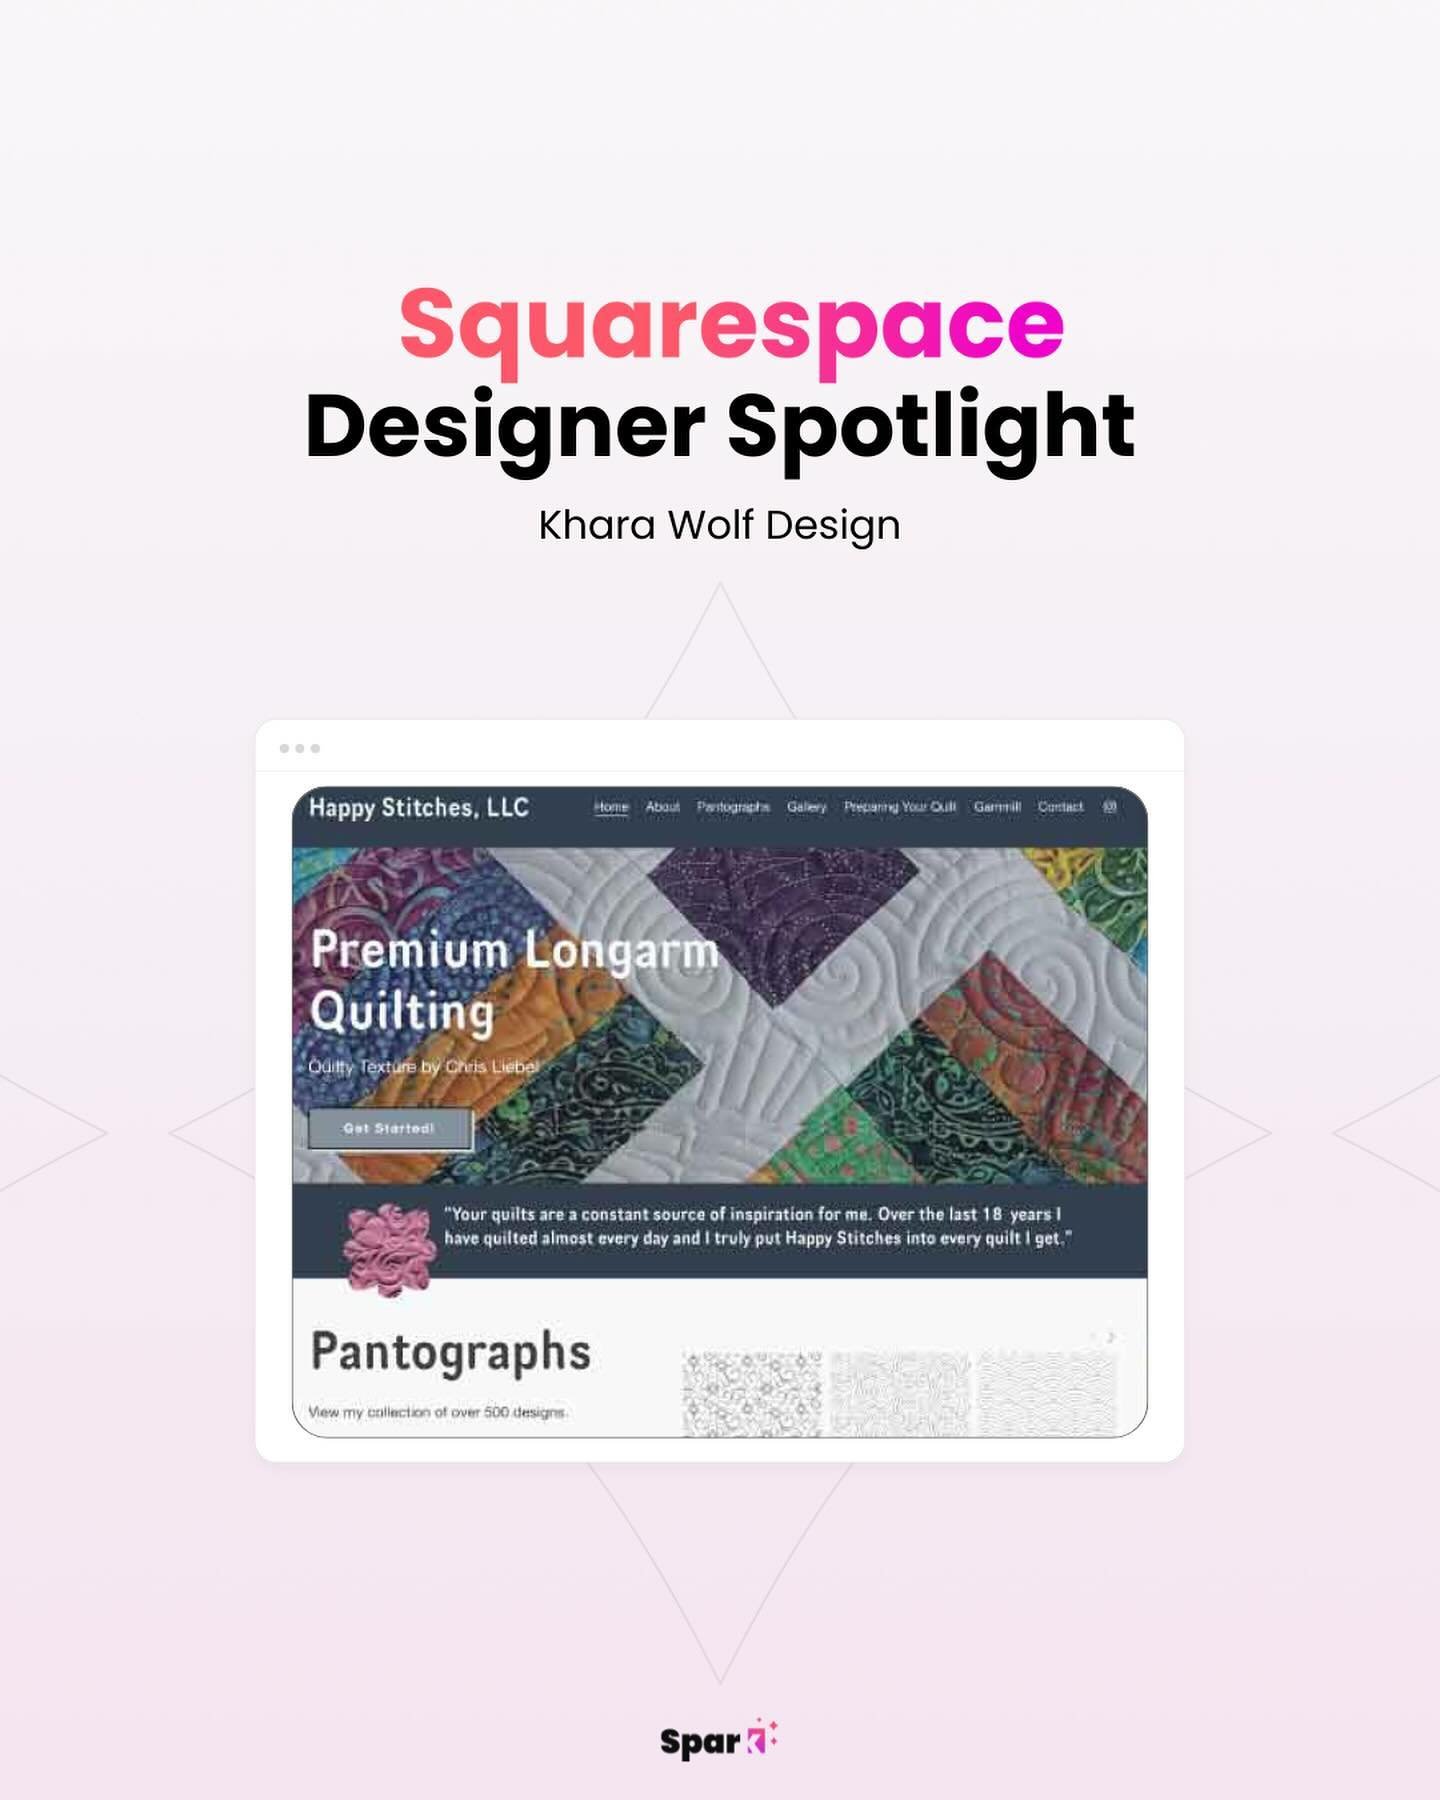 This month&rsquo;s featured designer is Khara Wolf Design ✨ @kharawolfdesign 

Khara is a Squarespace designer specializing in web design and templates! With her background in marketing, graphic design, and SEO, she crafts high-performing websites th